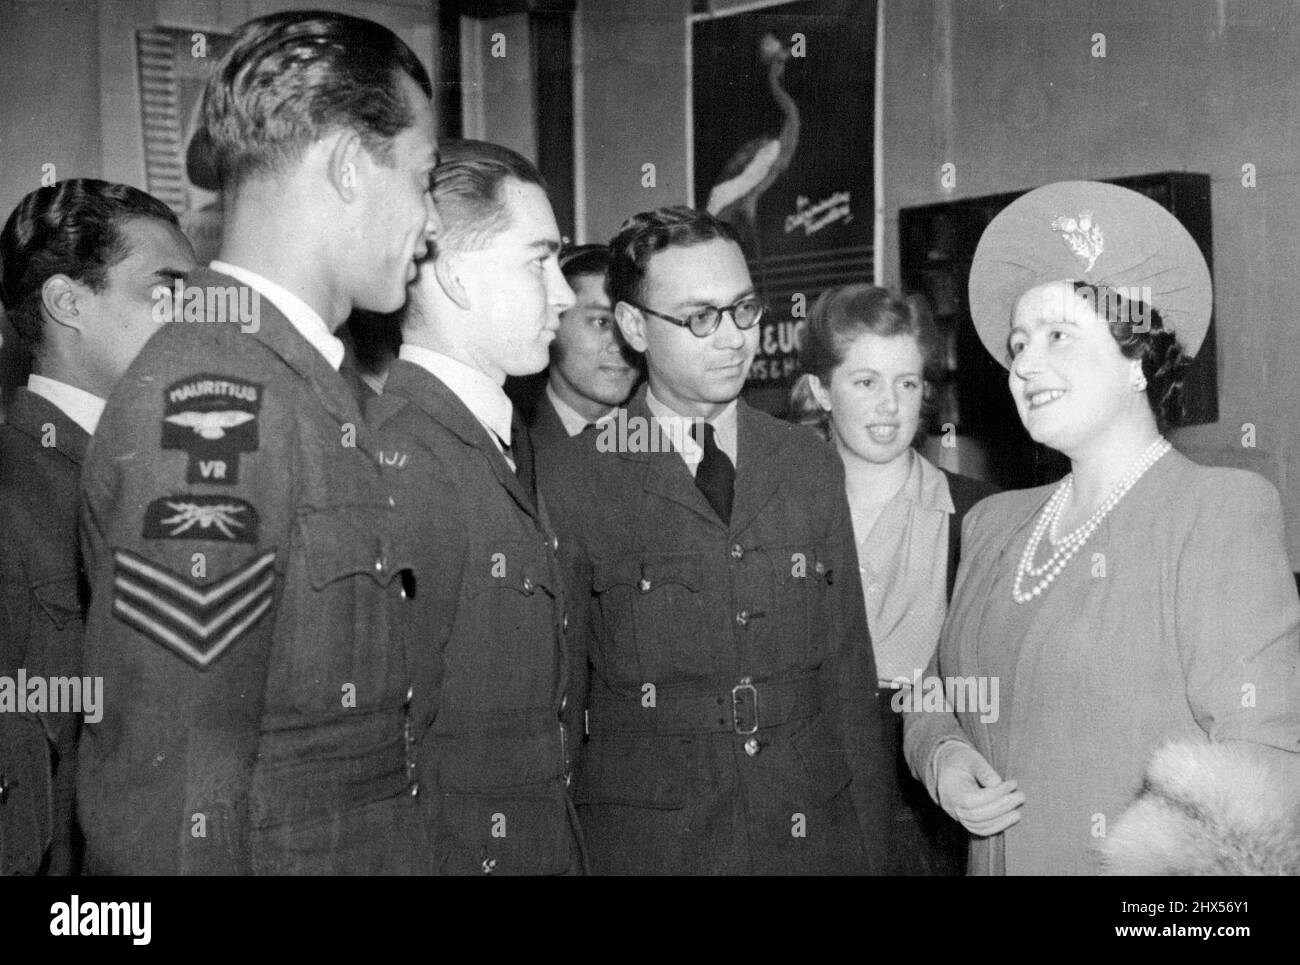 The Queen talking with a pilot officer from Fiji and on his right an air-gunner from Mauritius. H.M.The Queen this morning visited a Department of the Victoria League Colonel war services Committee where she talked to members from the colonies. November 23, 1943. Stock Photo